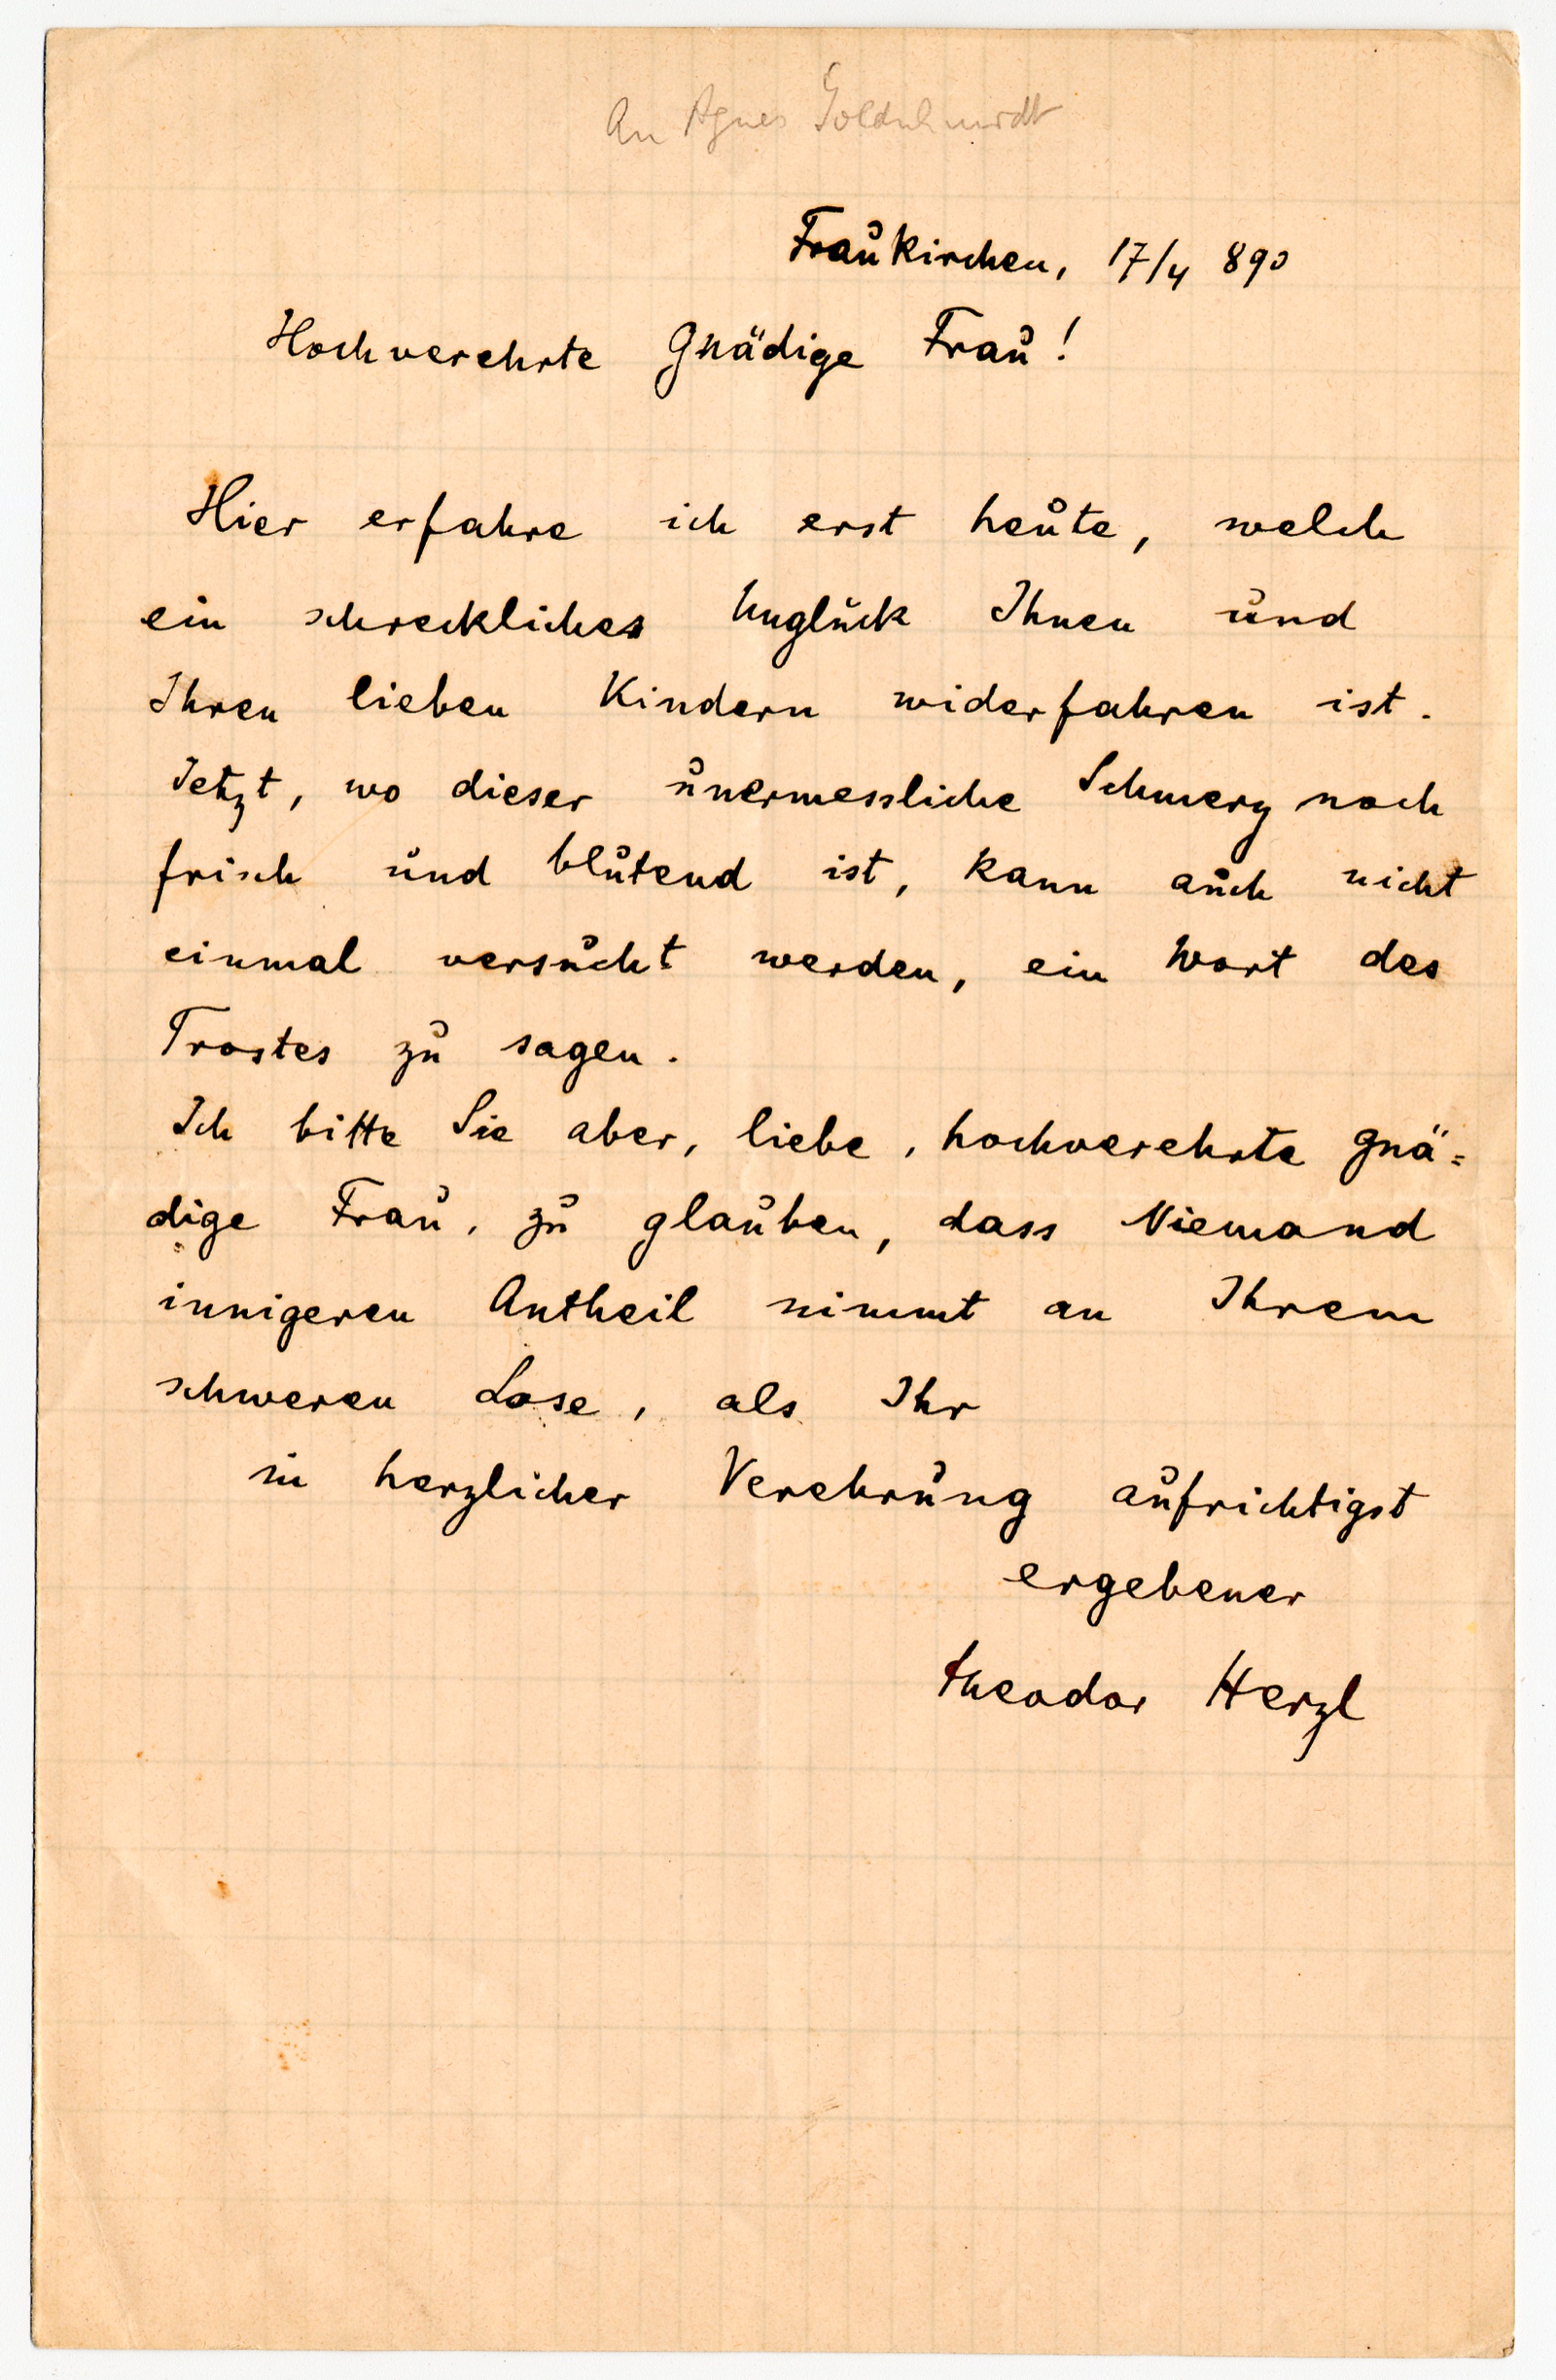 Theodore Herzl Writes a Condolence Letter, Seemingly in Connection With Anti-Semitic Attacks